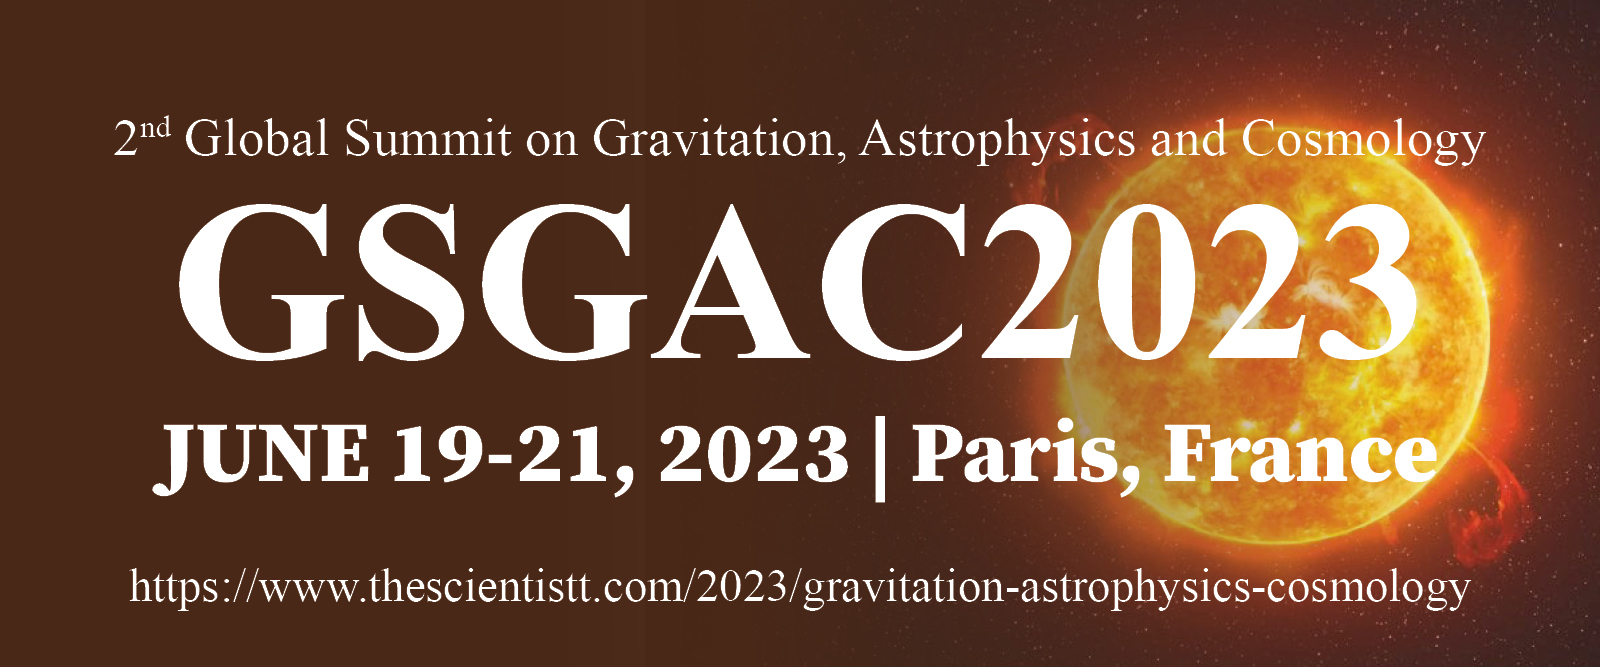 2nd Global Summit on Gravitation, Astrophysics and Cosmology